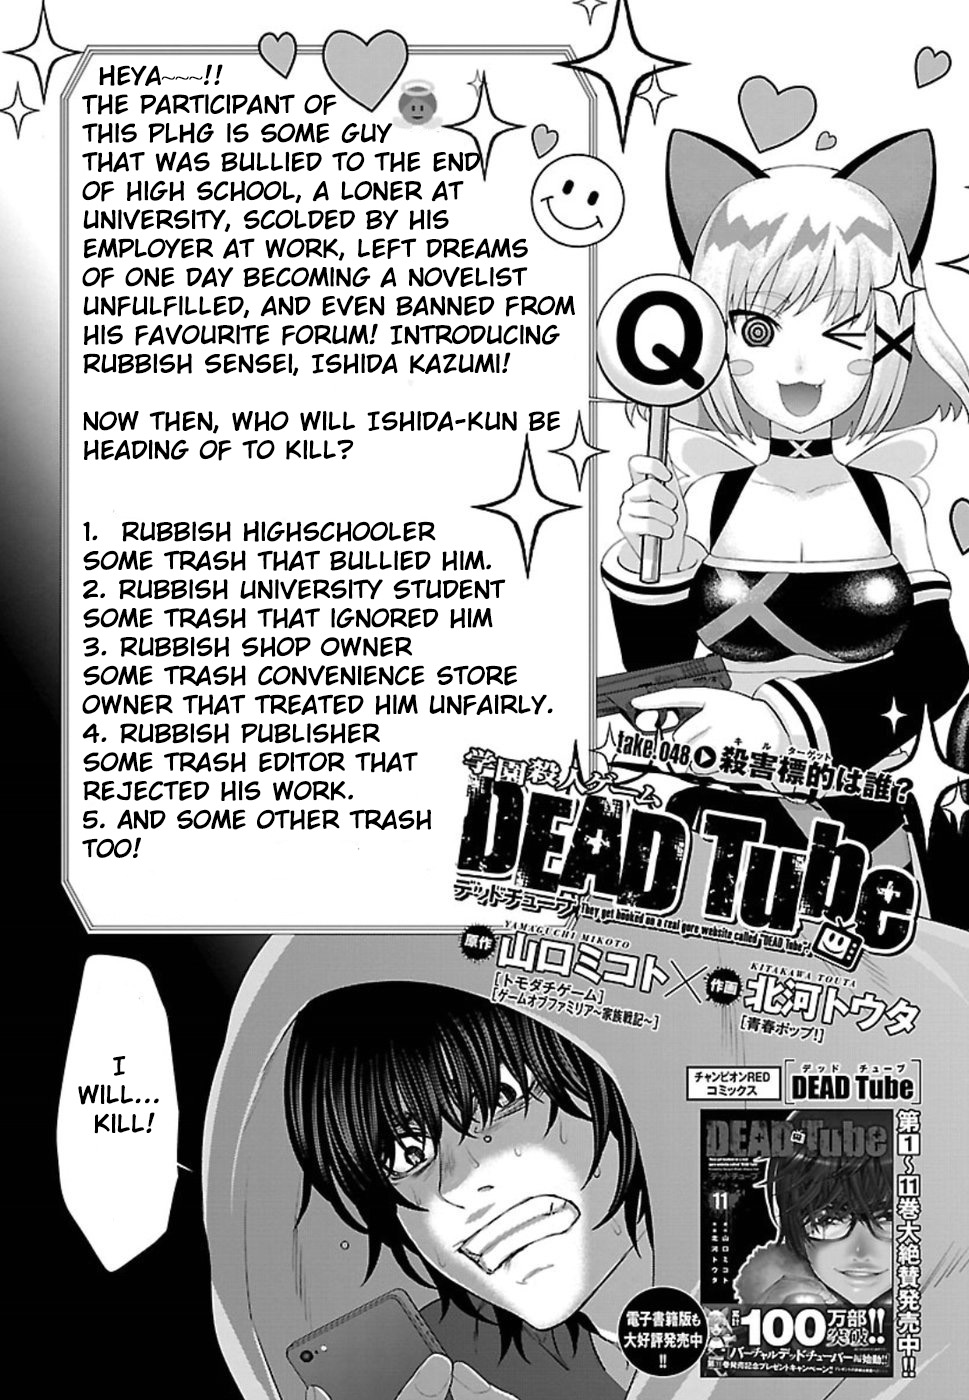 DEAD Tube Vol. 12 Ch. 48 Take 48 Who is the kill target?